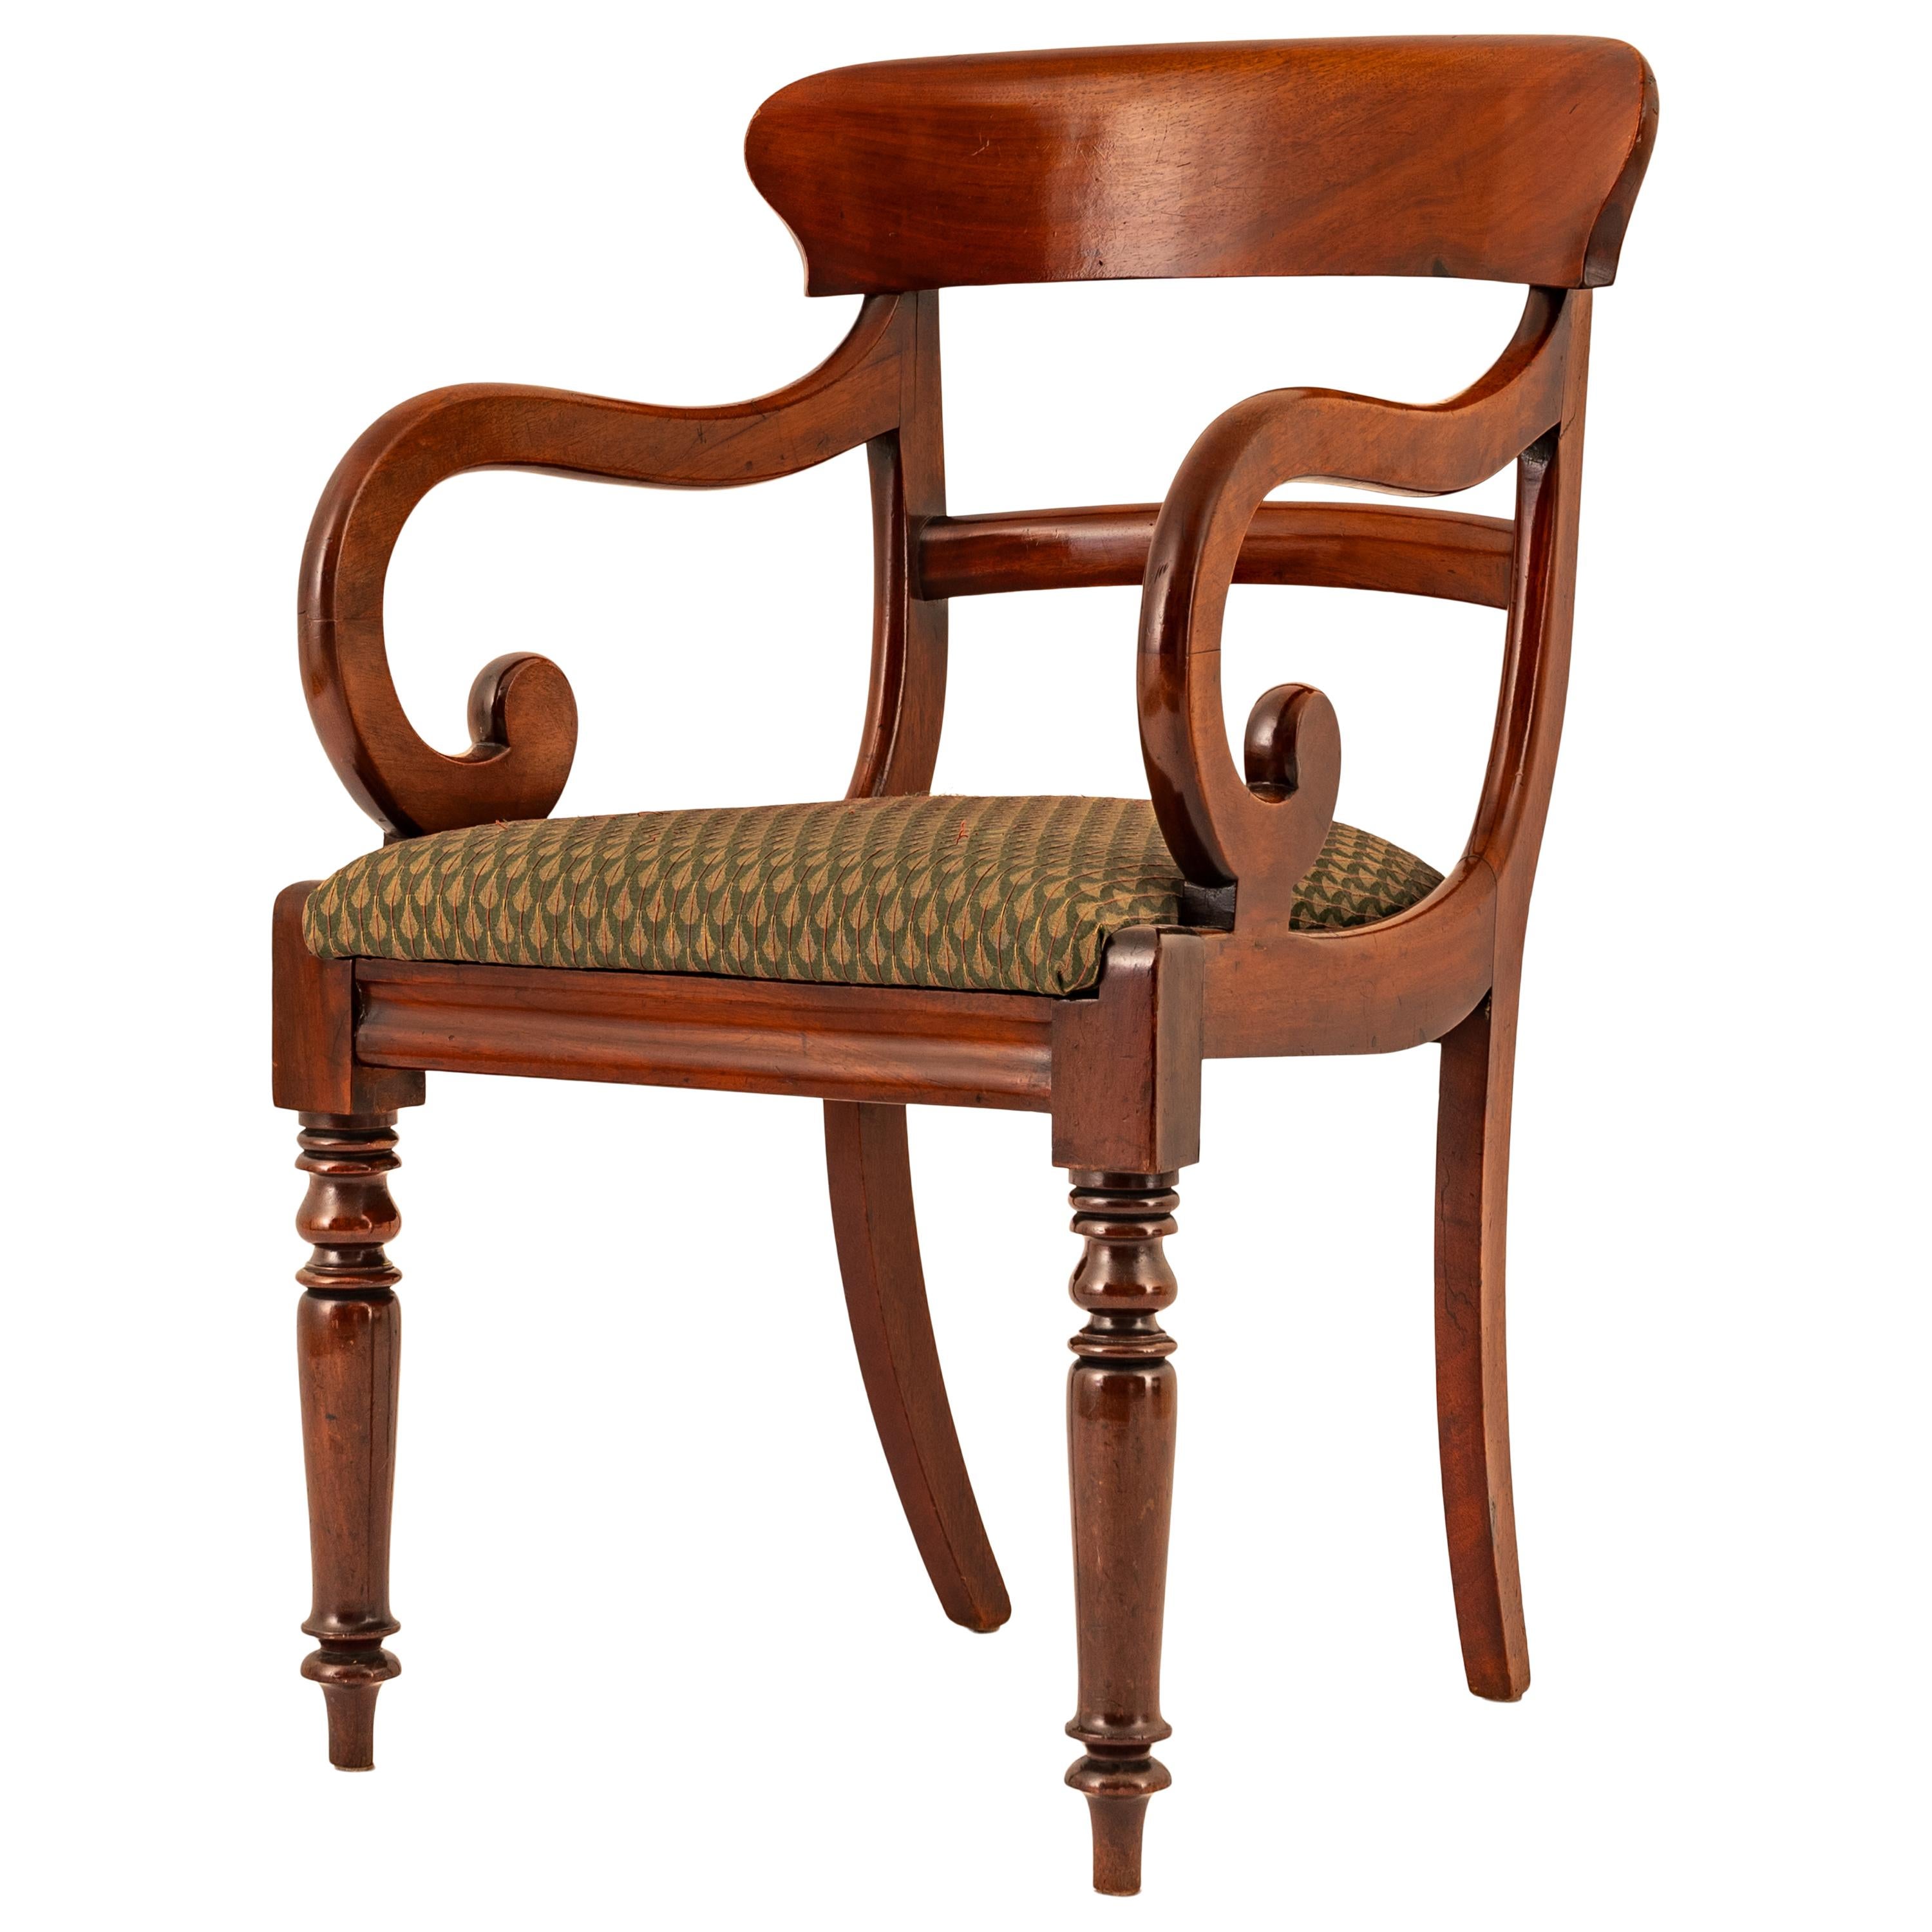 A good antique Georgian Regency desk library chair, circa 1820.
This very stylish chair is made from the finest solid Cuban mahogany, the chair has a substantial back splat support with a curved rail below, the chair having extravagant curved